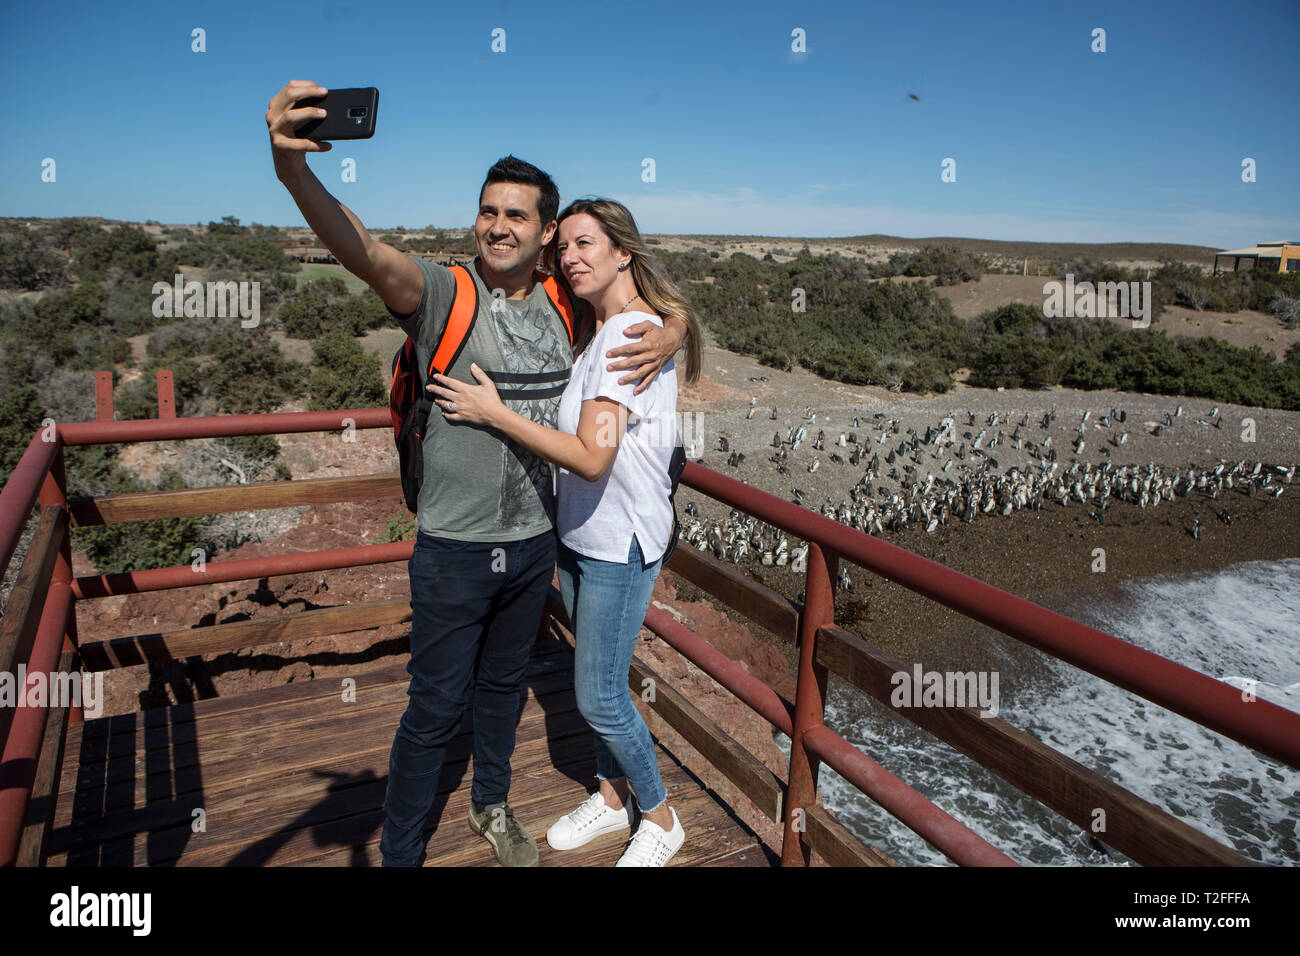 Chubut. 28th Mar, 2019. Photo taken on March 28, 2019 shows a couple taking selfies at the Punta Tombo Reserve, Chubut province, Argentina. The reserve was set up in 1979 in order to protect the largest continental colony of Magellanic penguins. Credit: Martin Zabala/Xinhua/Alamy Live News Stock Photo